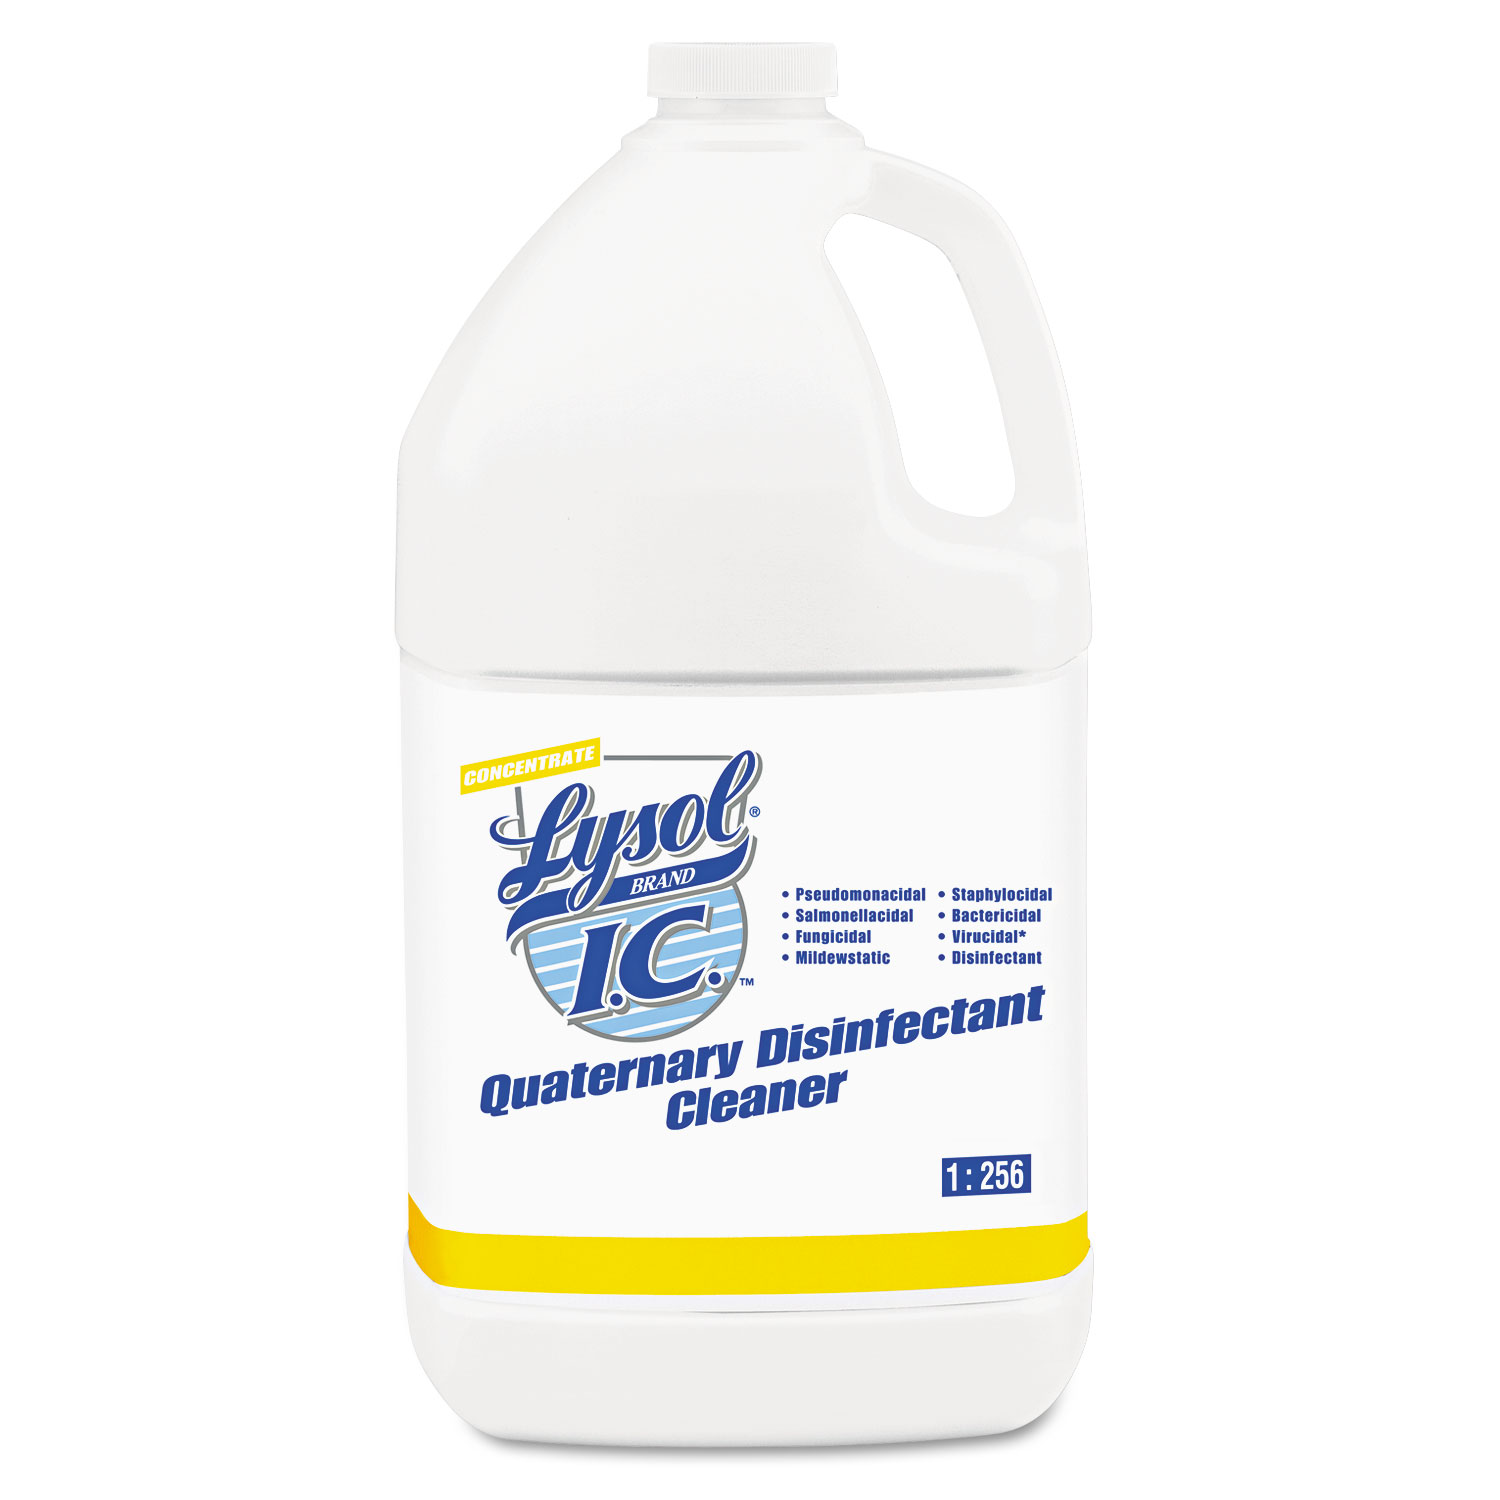 Quaternary Disinfectant Cleaner, 1gal Bottle